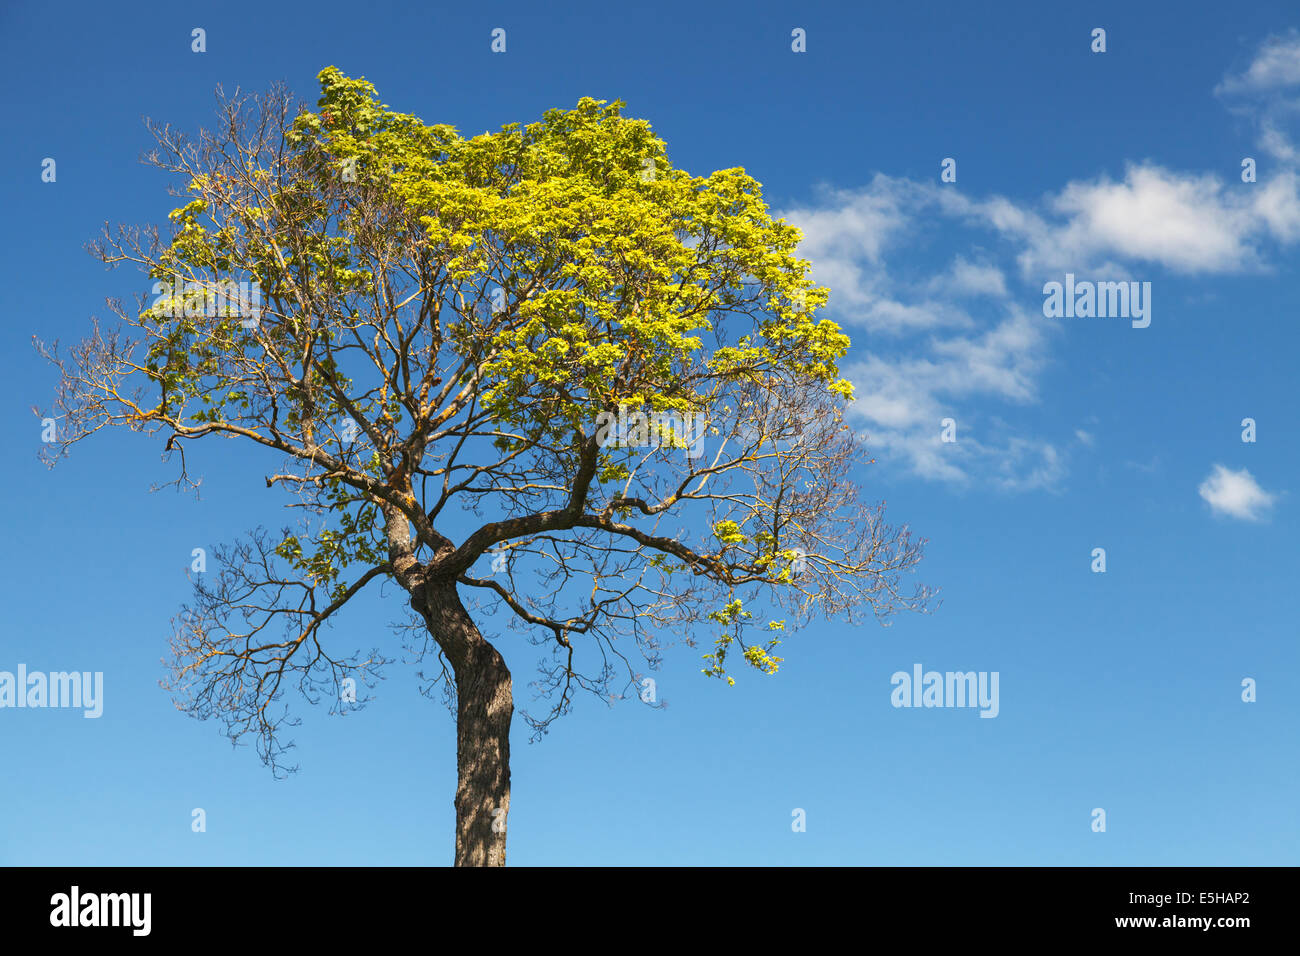 Bright green tree with blue sky and clouds on background Stock Photo